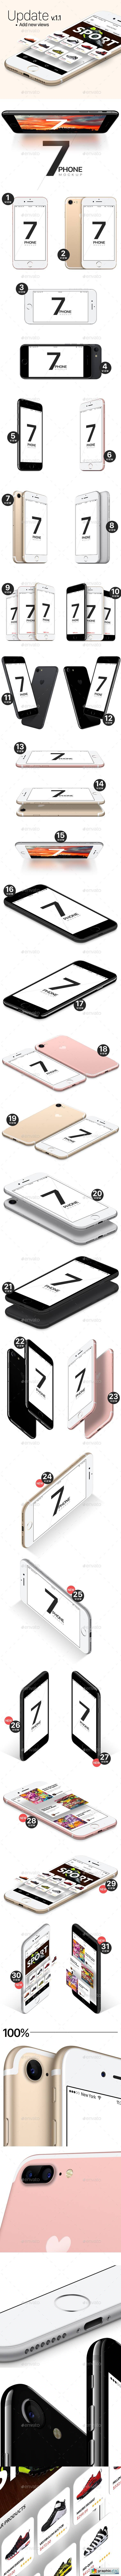 Phone 7 and 7 Plus vector Mockups